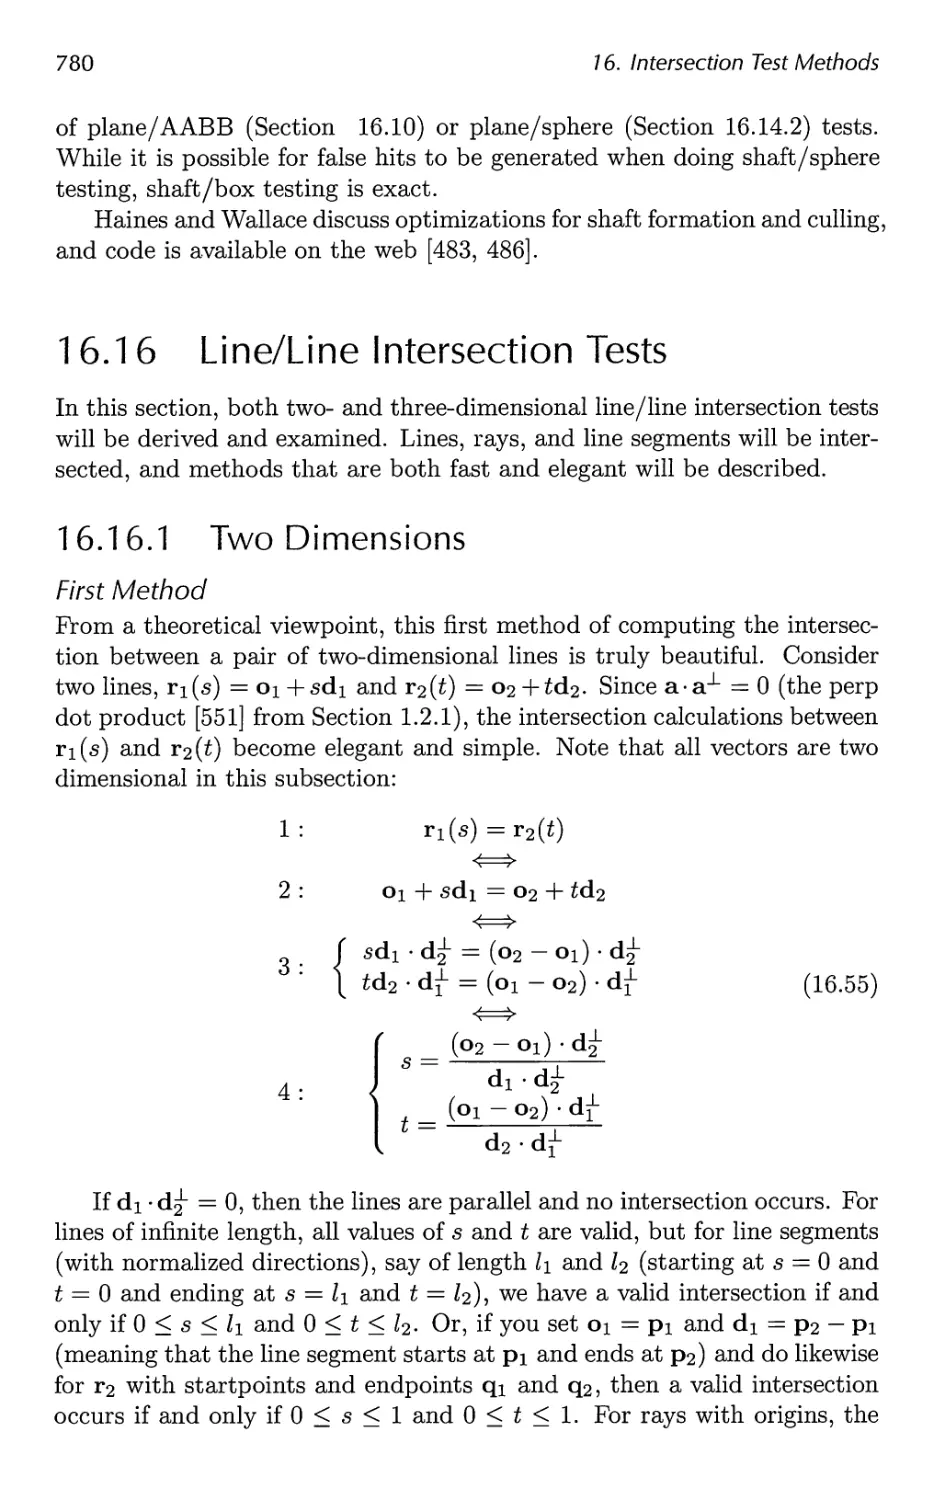 16.16 Line/Line Intersection Tests